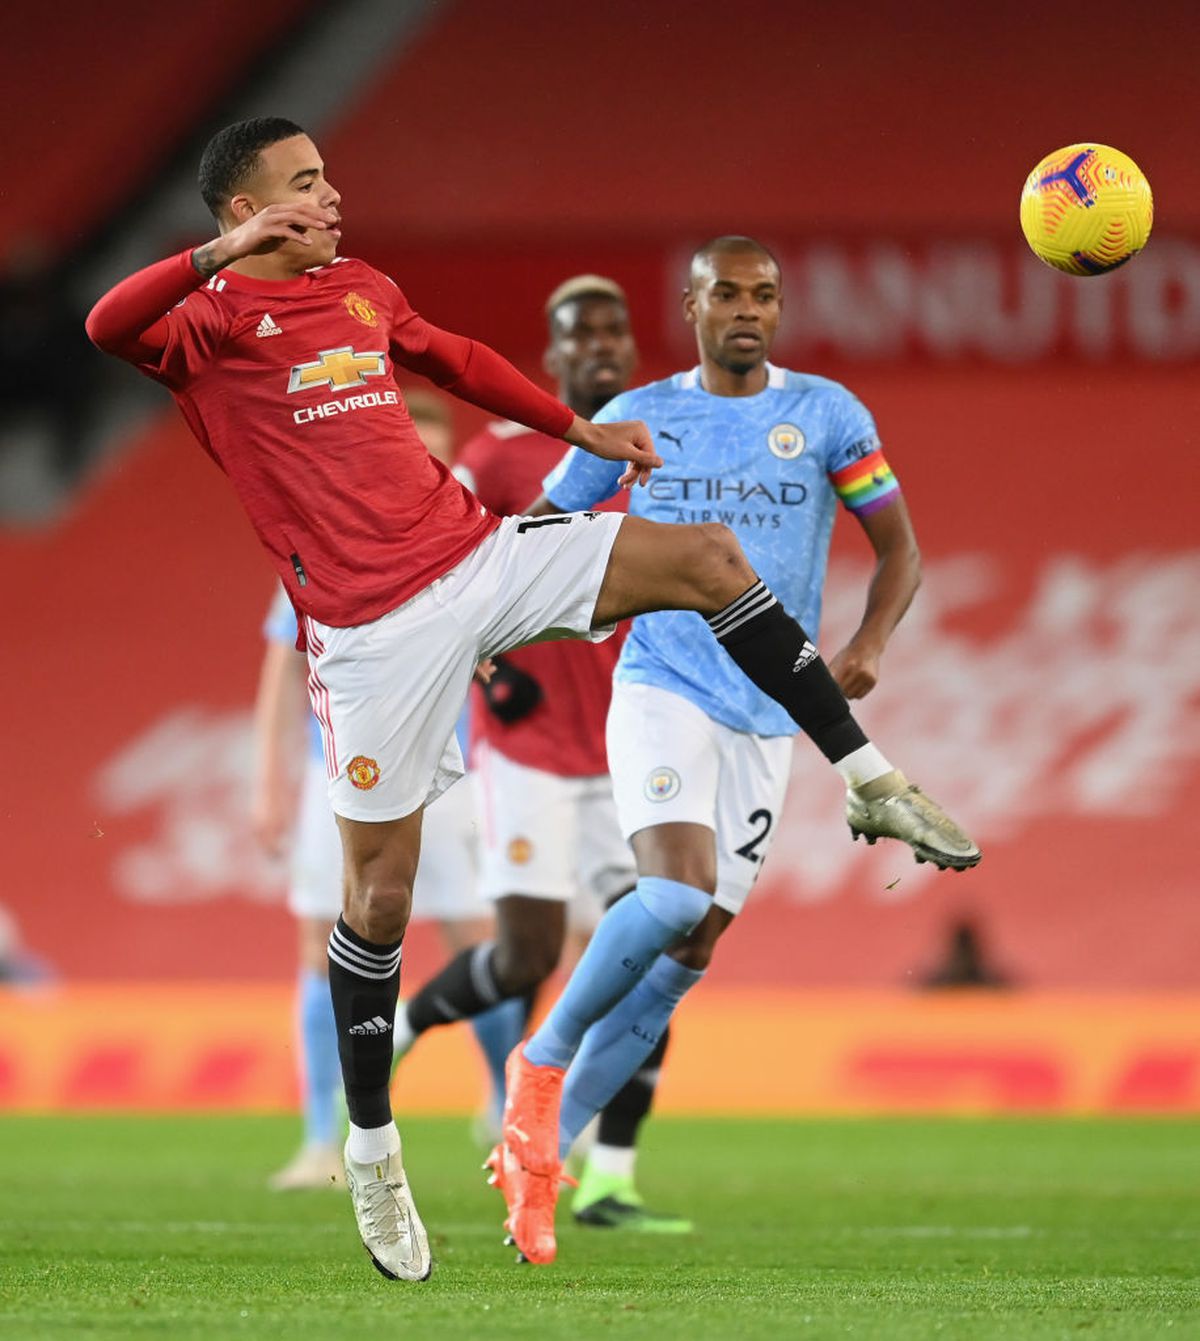 Manchester United - Manchester City / 12 decembrie 2020 / Getty